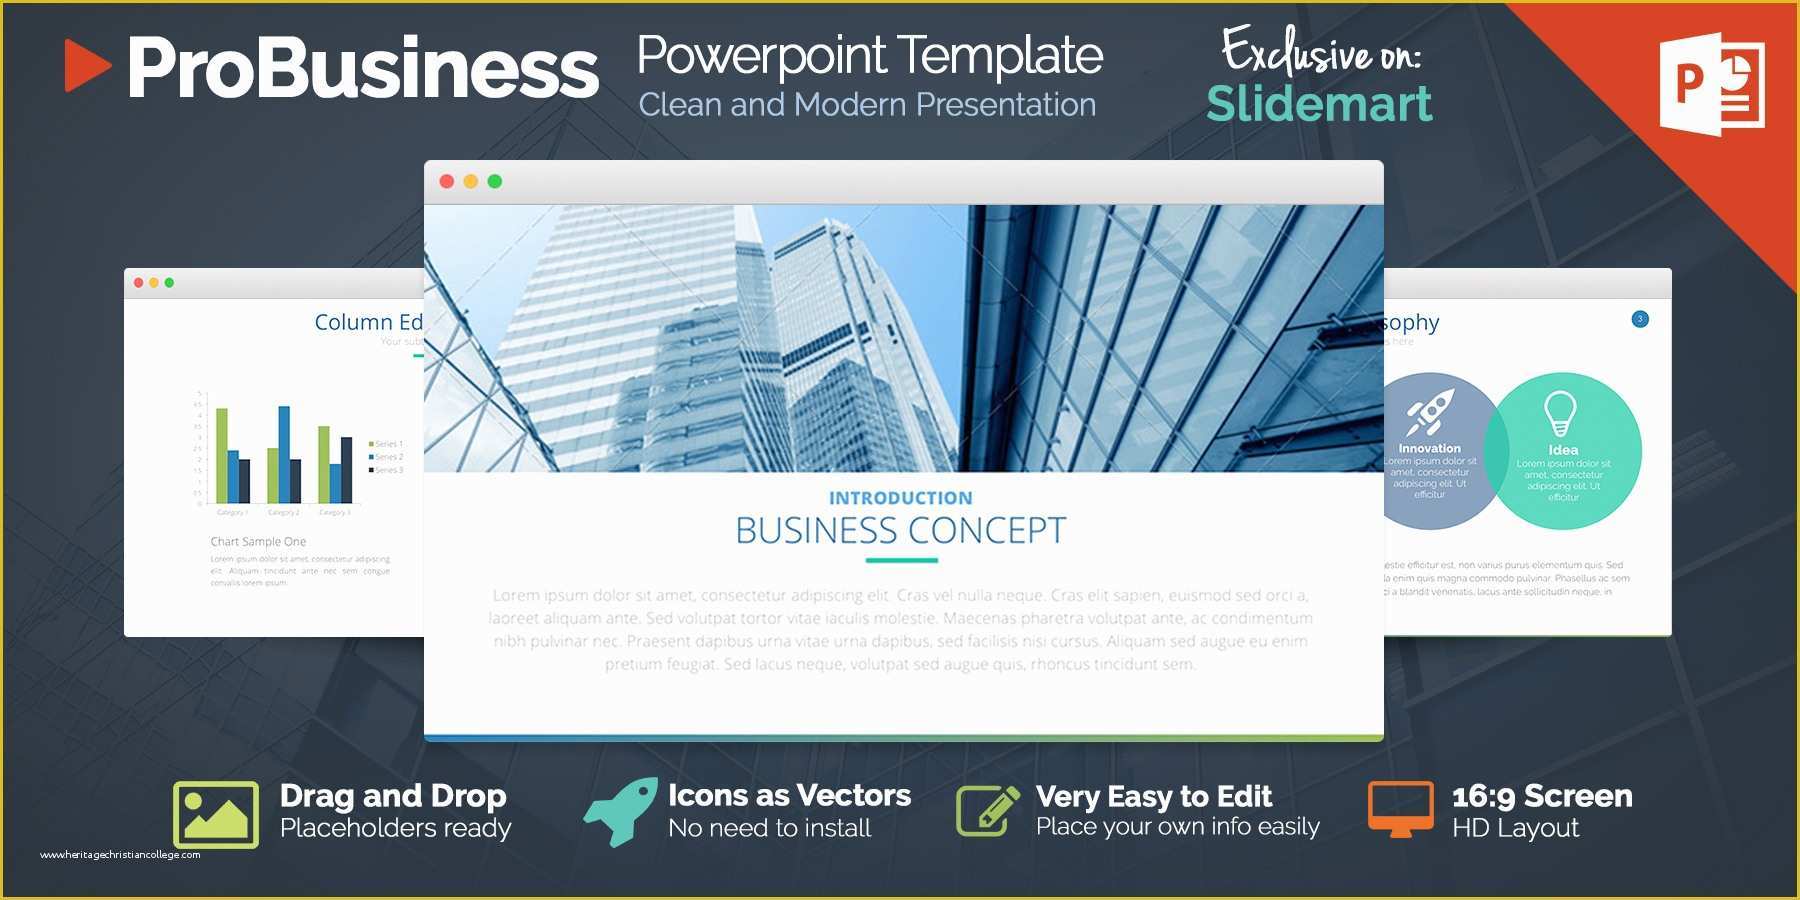 Free Ppt Templates Of the Best 8 Free Powerpoint Templates